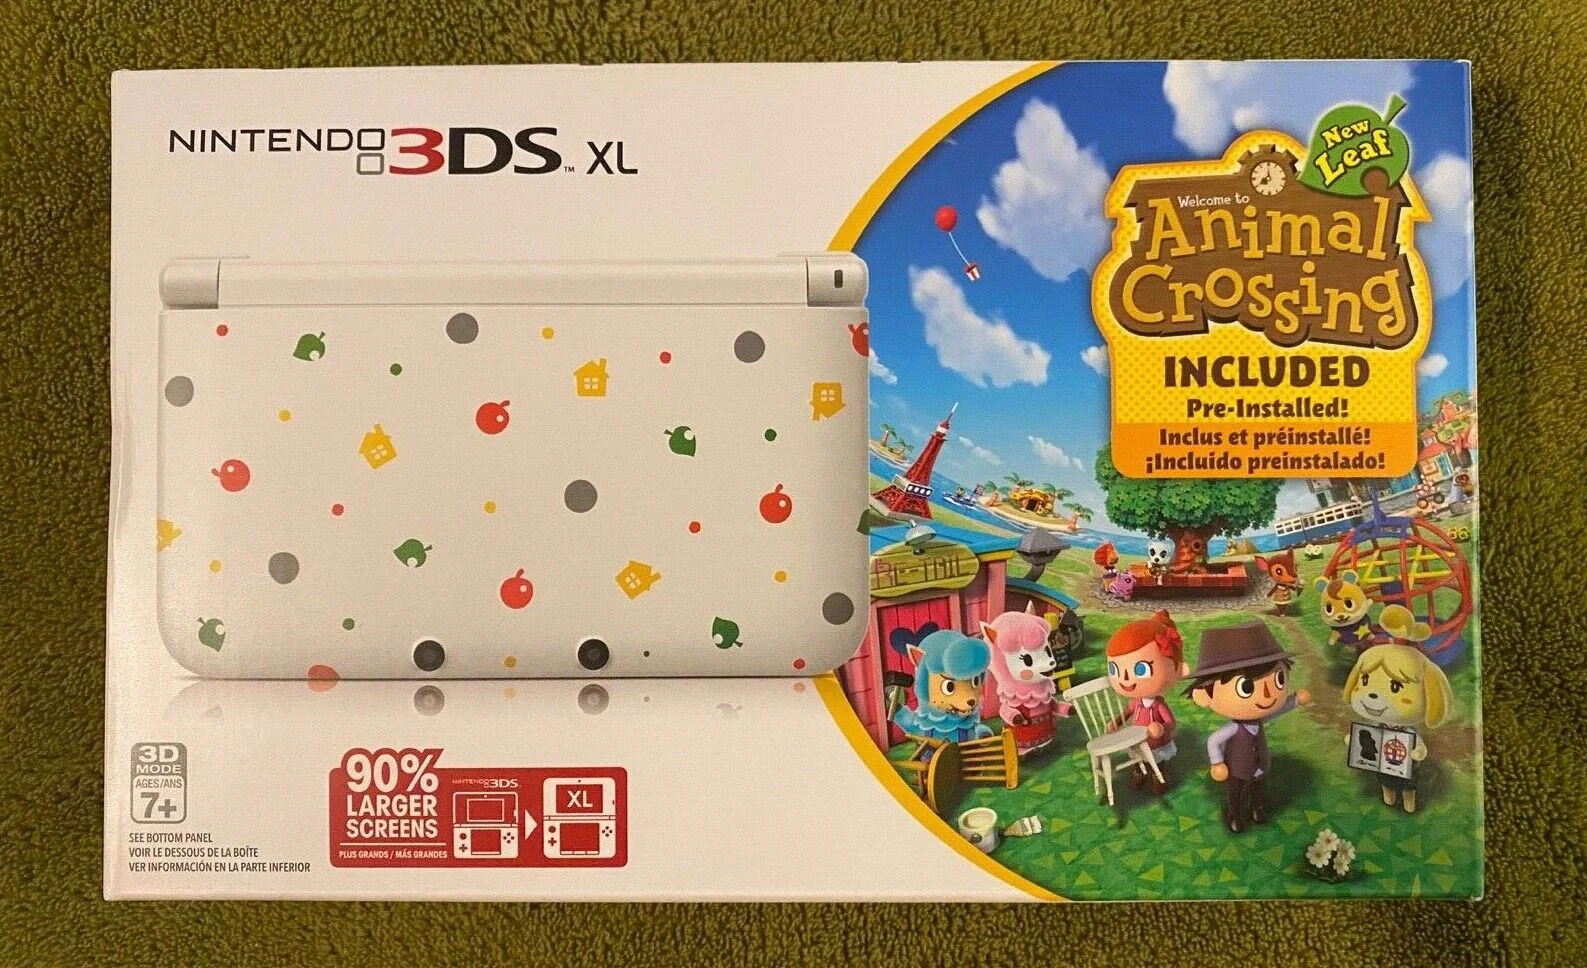 Shackle chocolate Unforeseen circumstances CV | Nintendo 3DS XL Animal Crossing Console [NA]